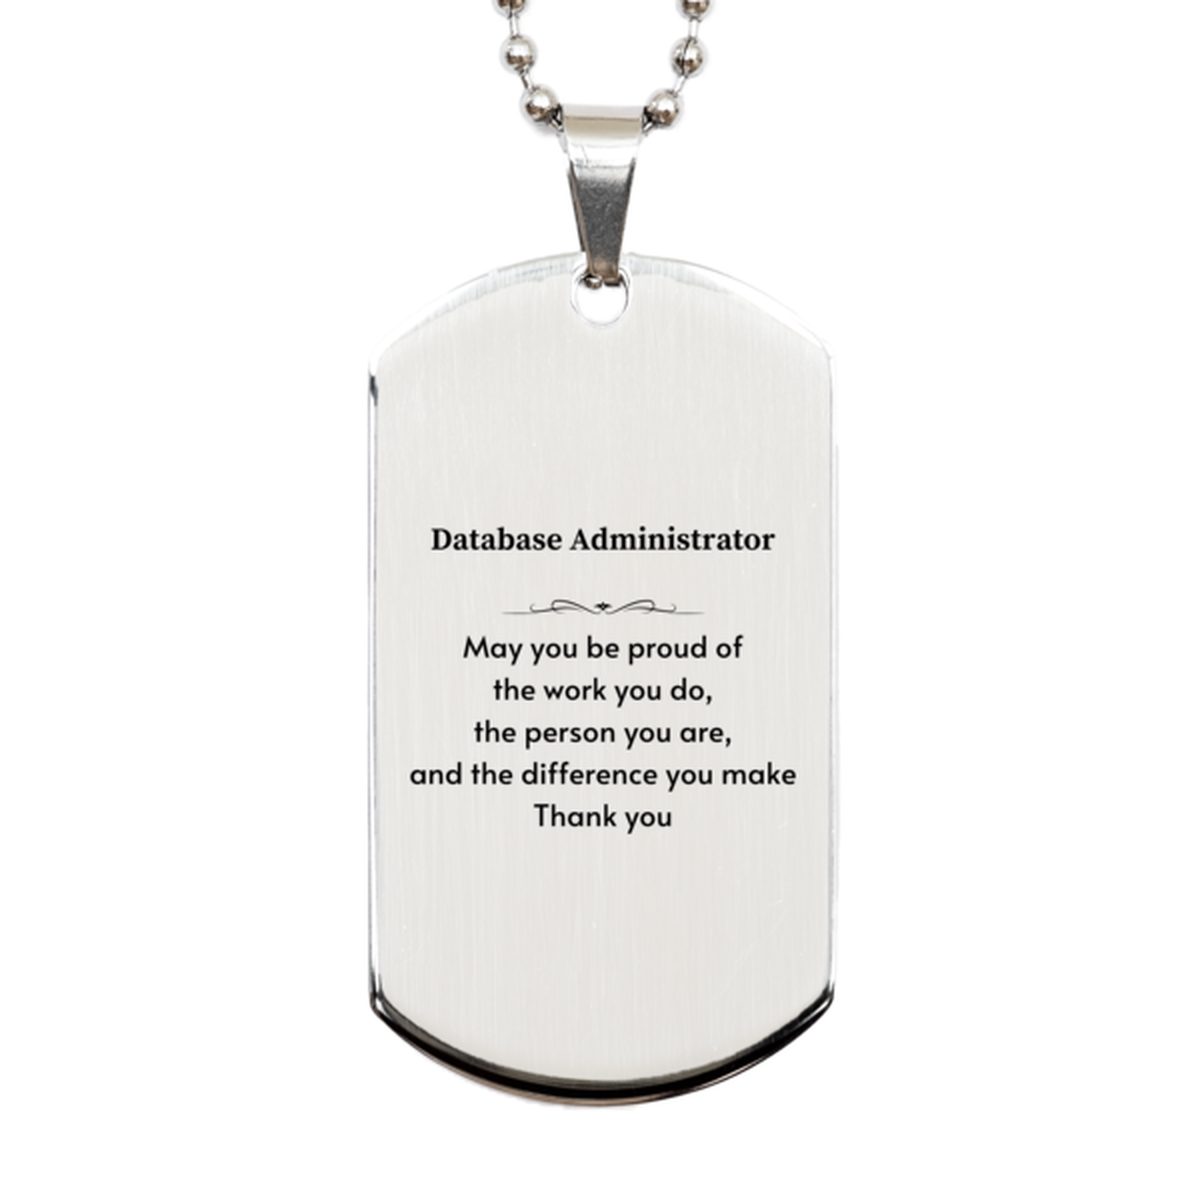 Heartwarming Silver Dog Tag Retirement Coworkers Gifts for Database Administrator, Database Administrator May You be proud of the work you do, the person you are Gifts for Boss Men Women Friends